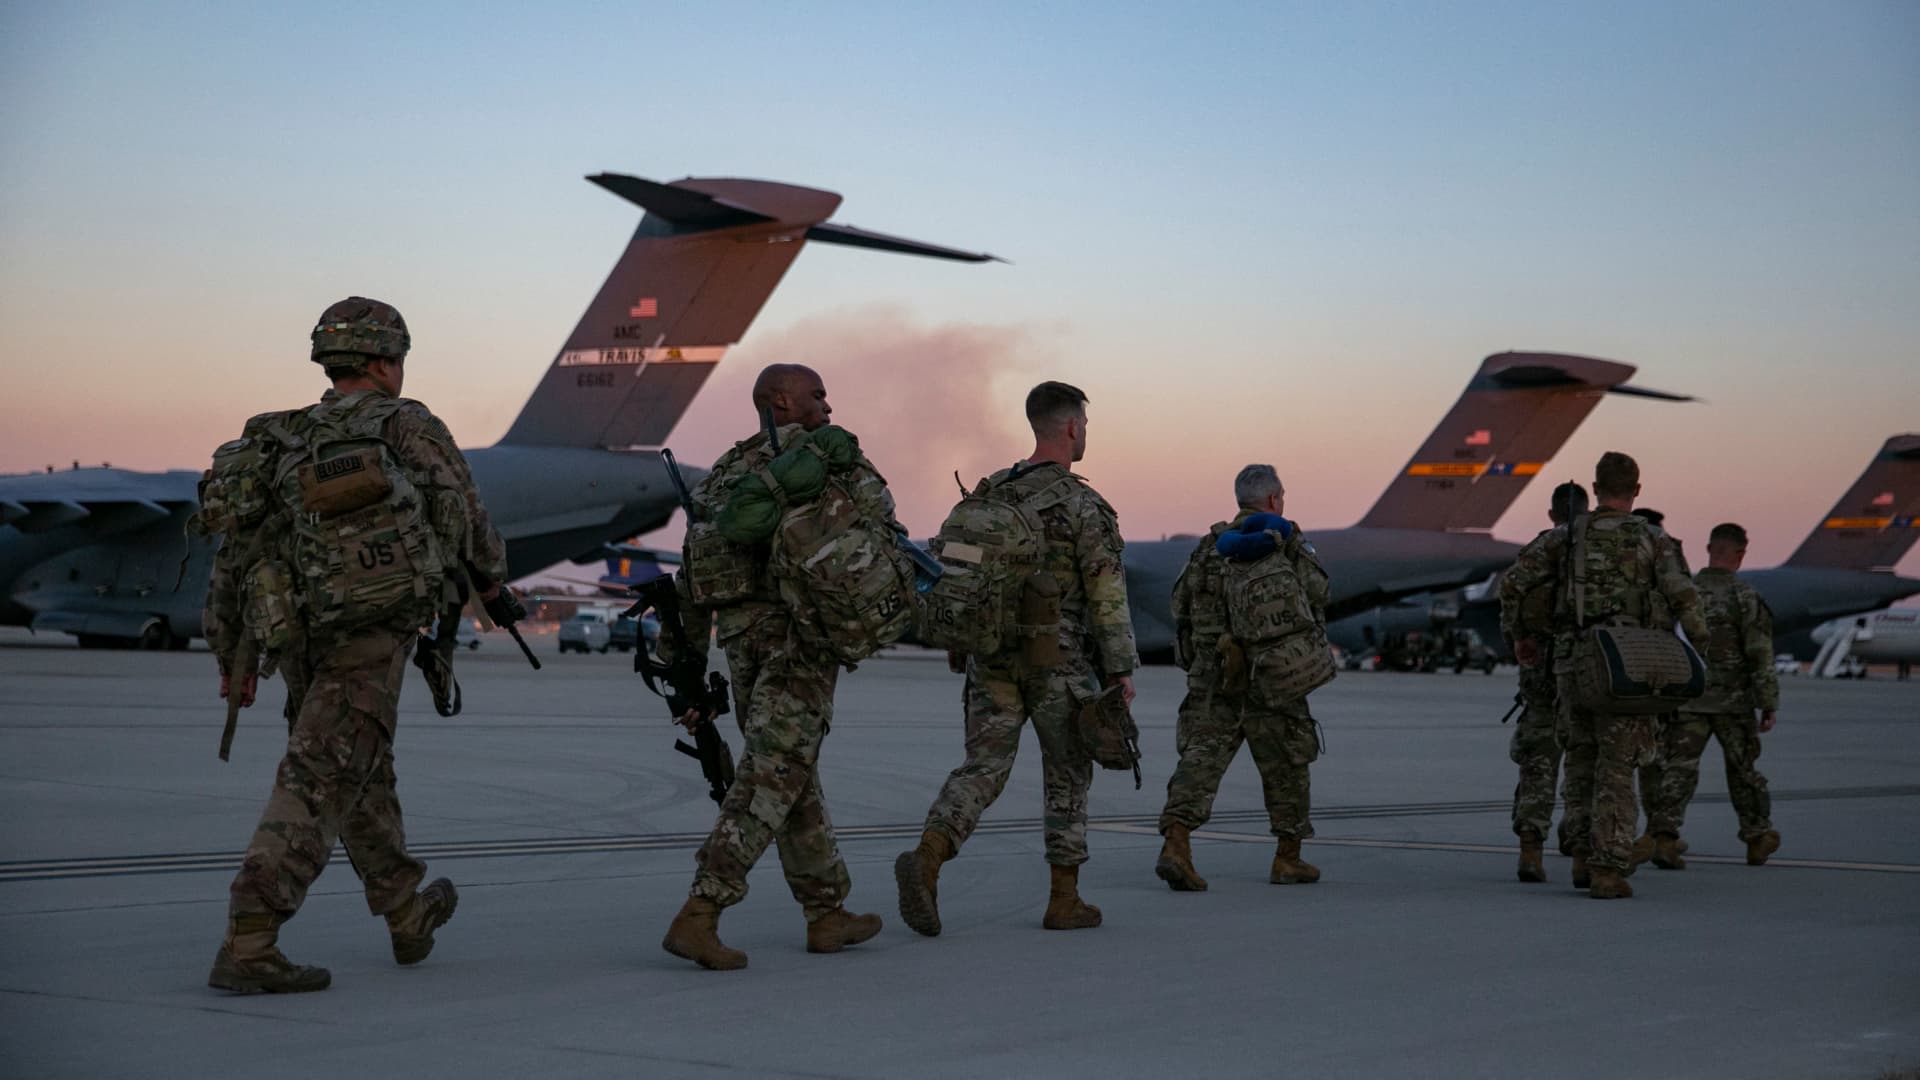 US soldiers walk to board a plane from Pope Army Airfield in Fort Bragg, North Carolina on February 14, 2021 as they are deployed to Europe.